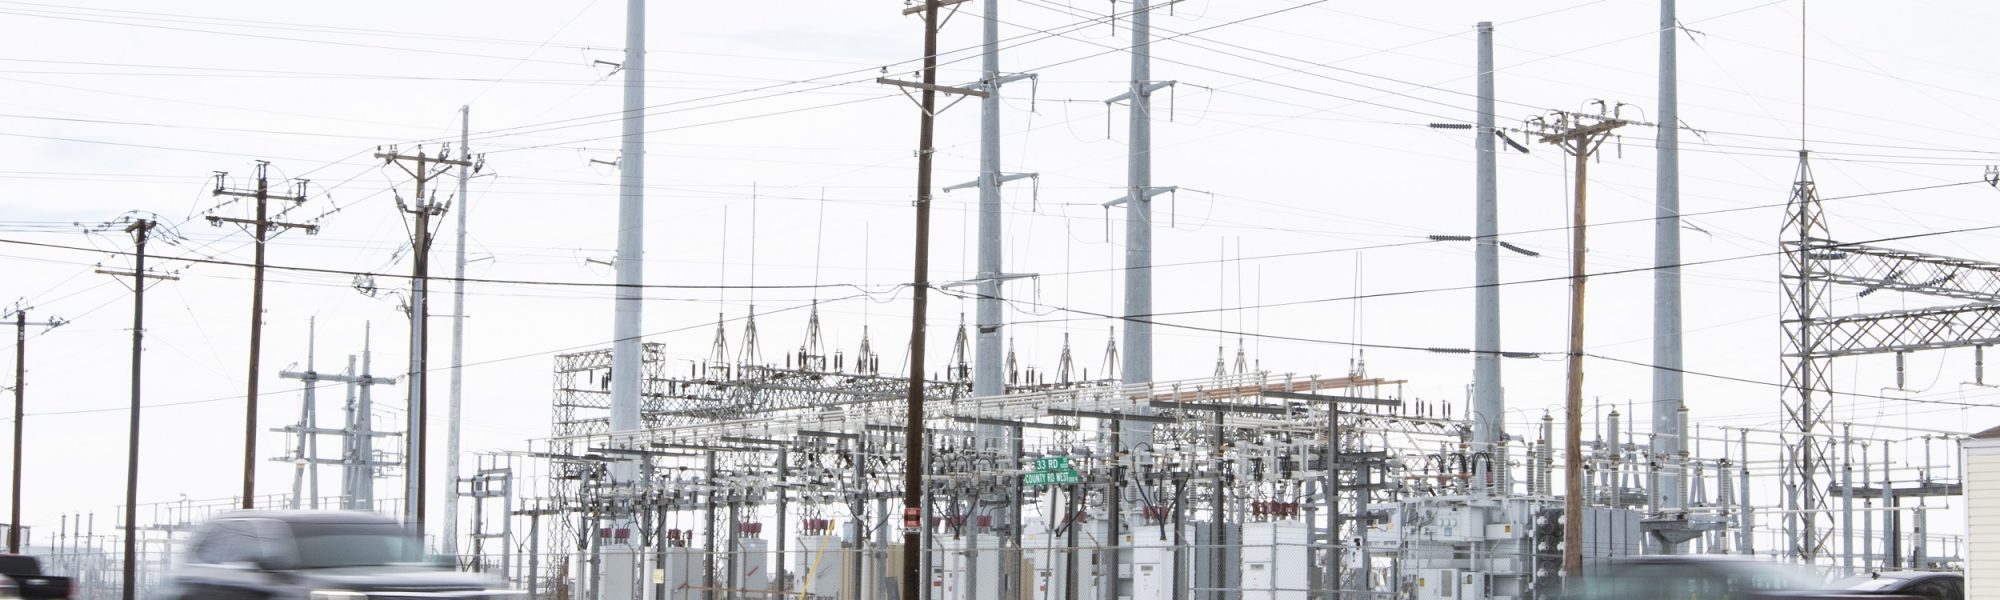 Electric grid manager argues for immunity at Texas high court